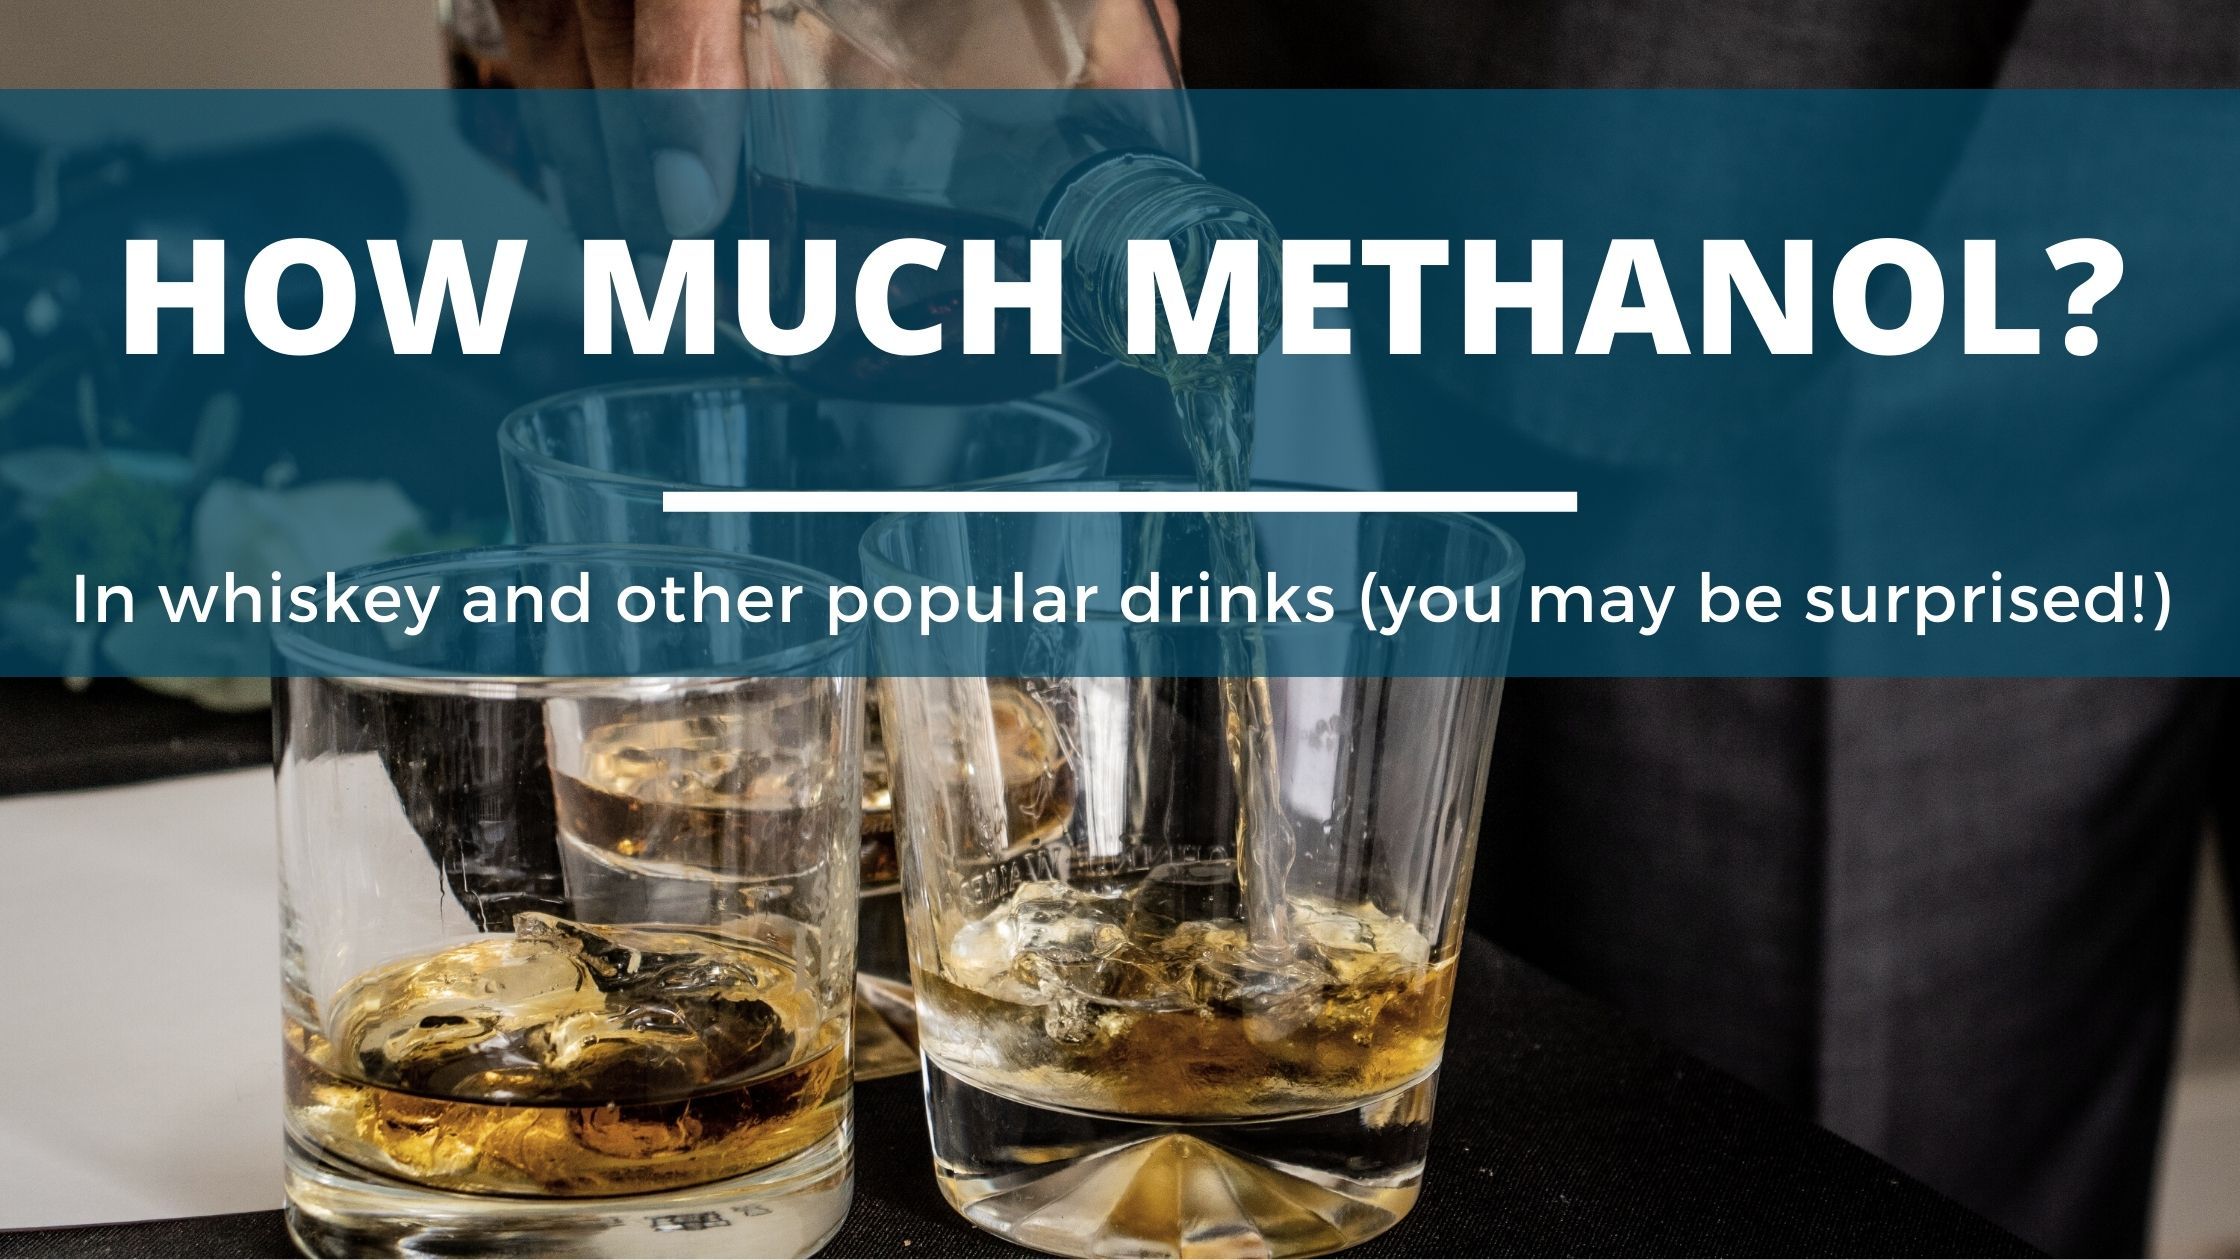 Image of diy distilling how much methanol in whiskey and other alcoholic drinks